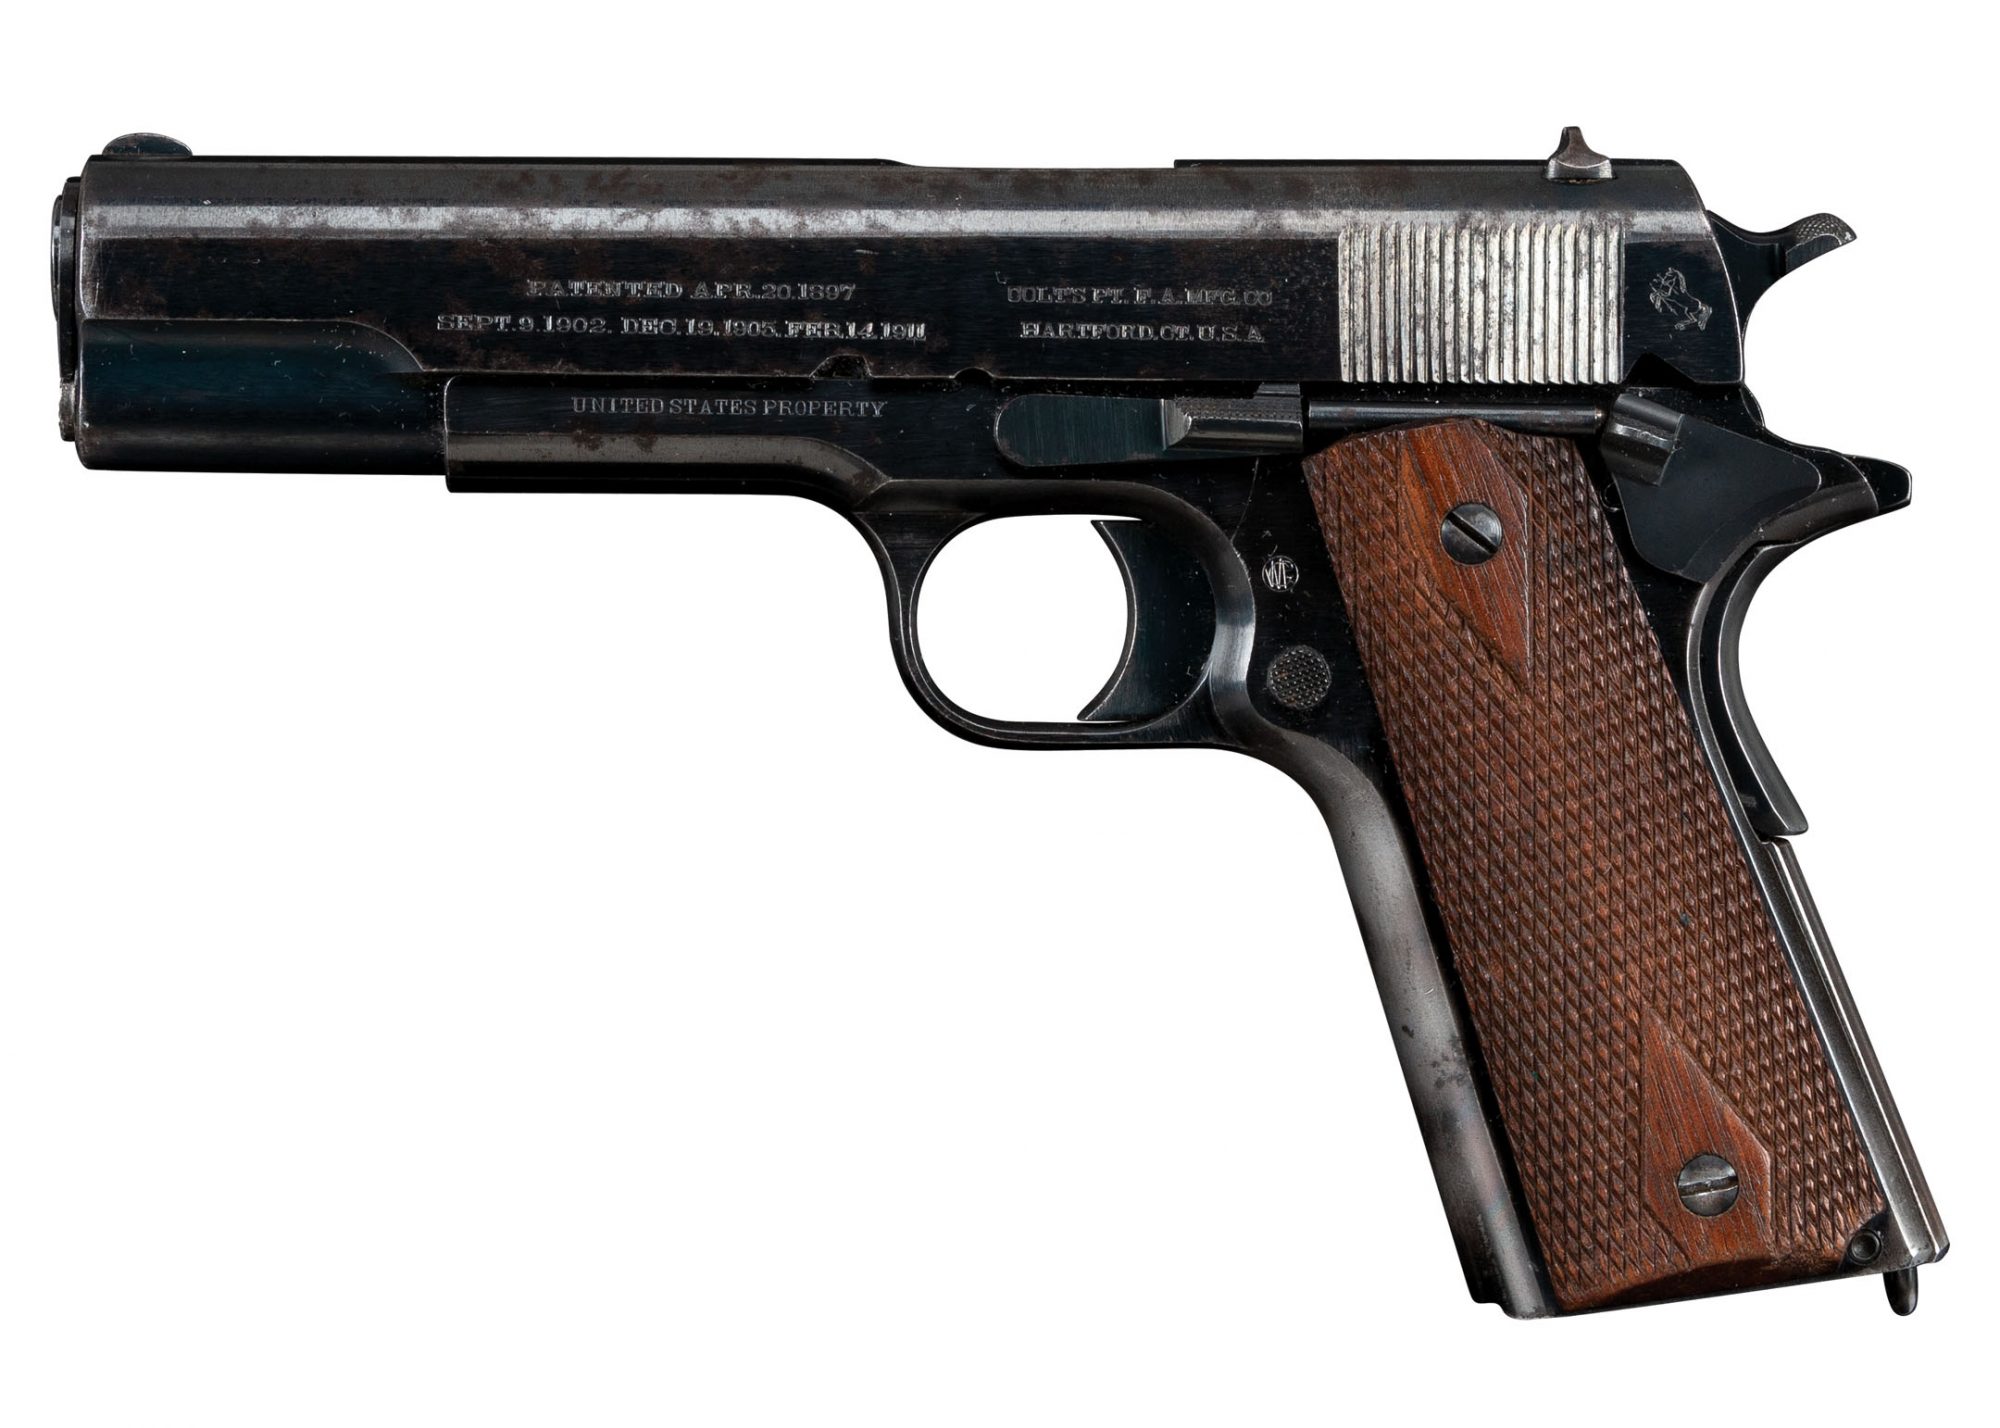 Photo of a Colt Model 1911 U.S. Army from 1913, before restoration services performed by Turnbull Restoration of Bloomfield, NY